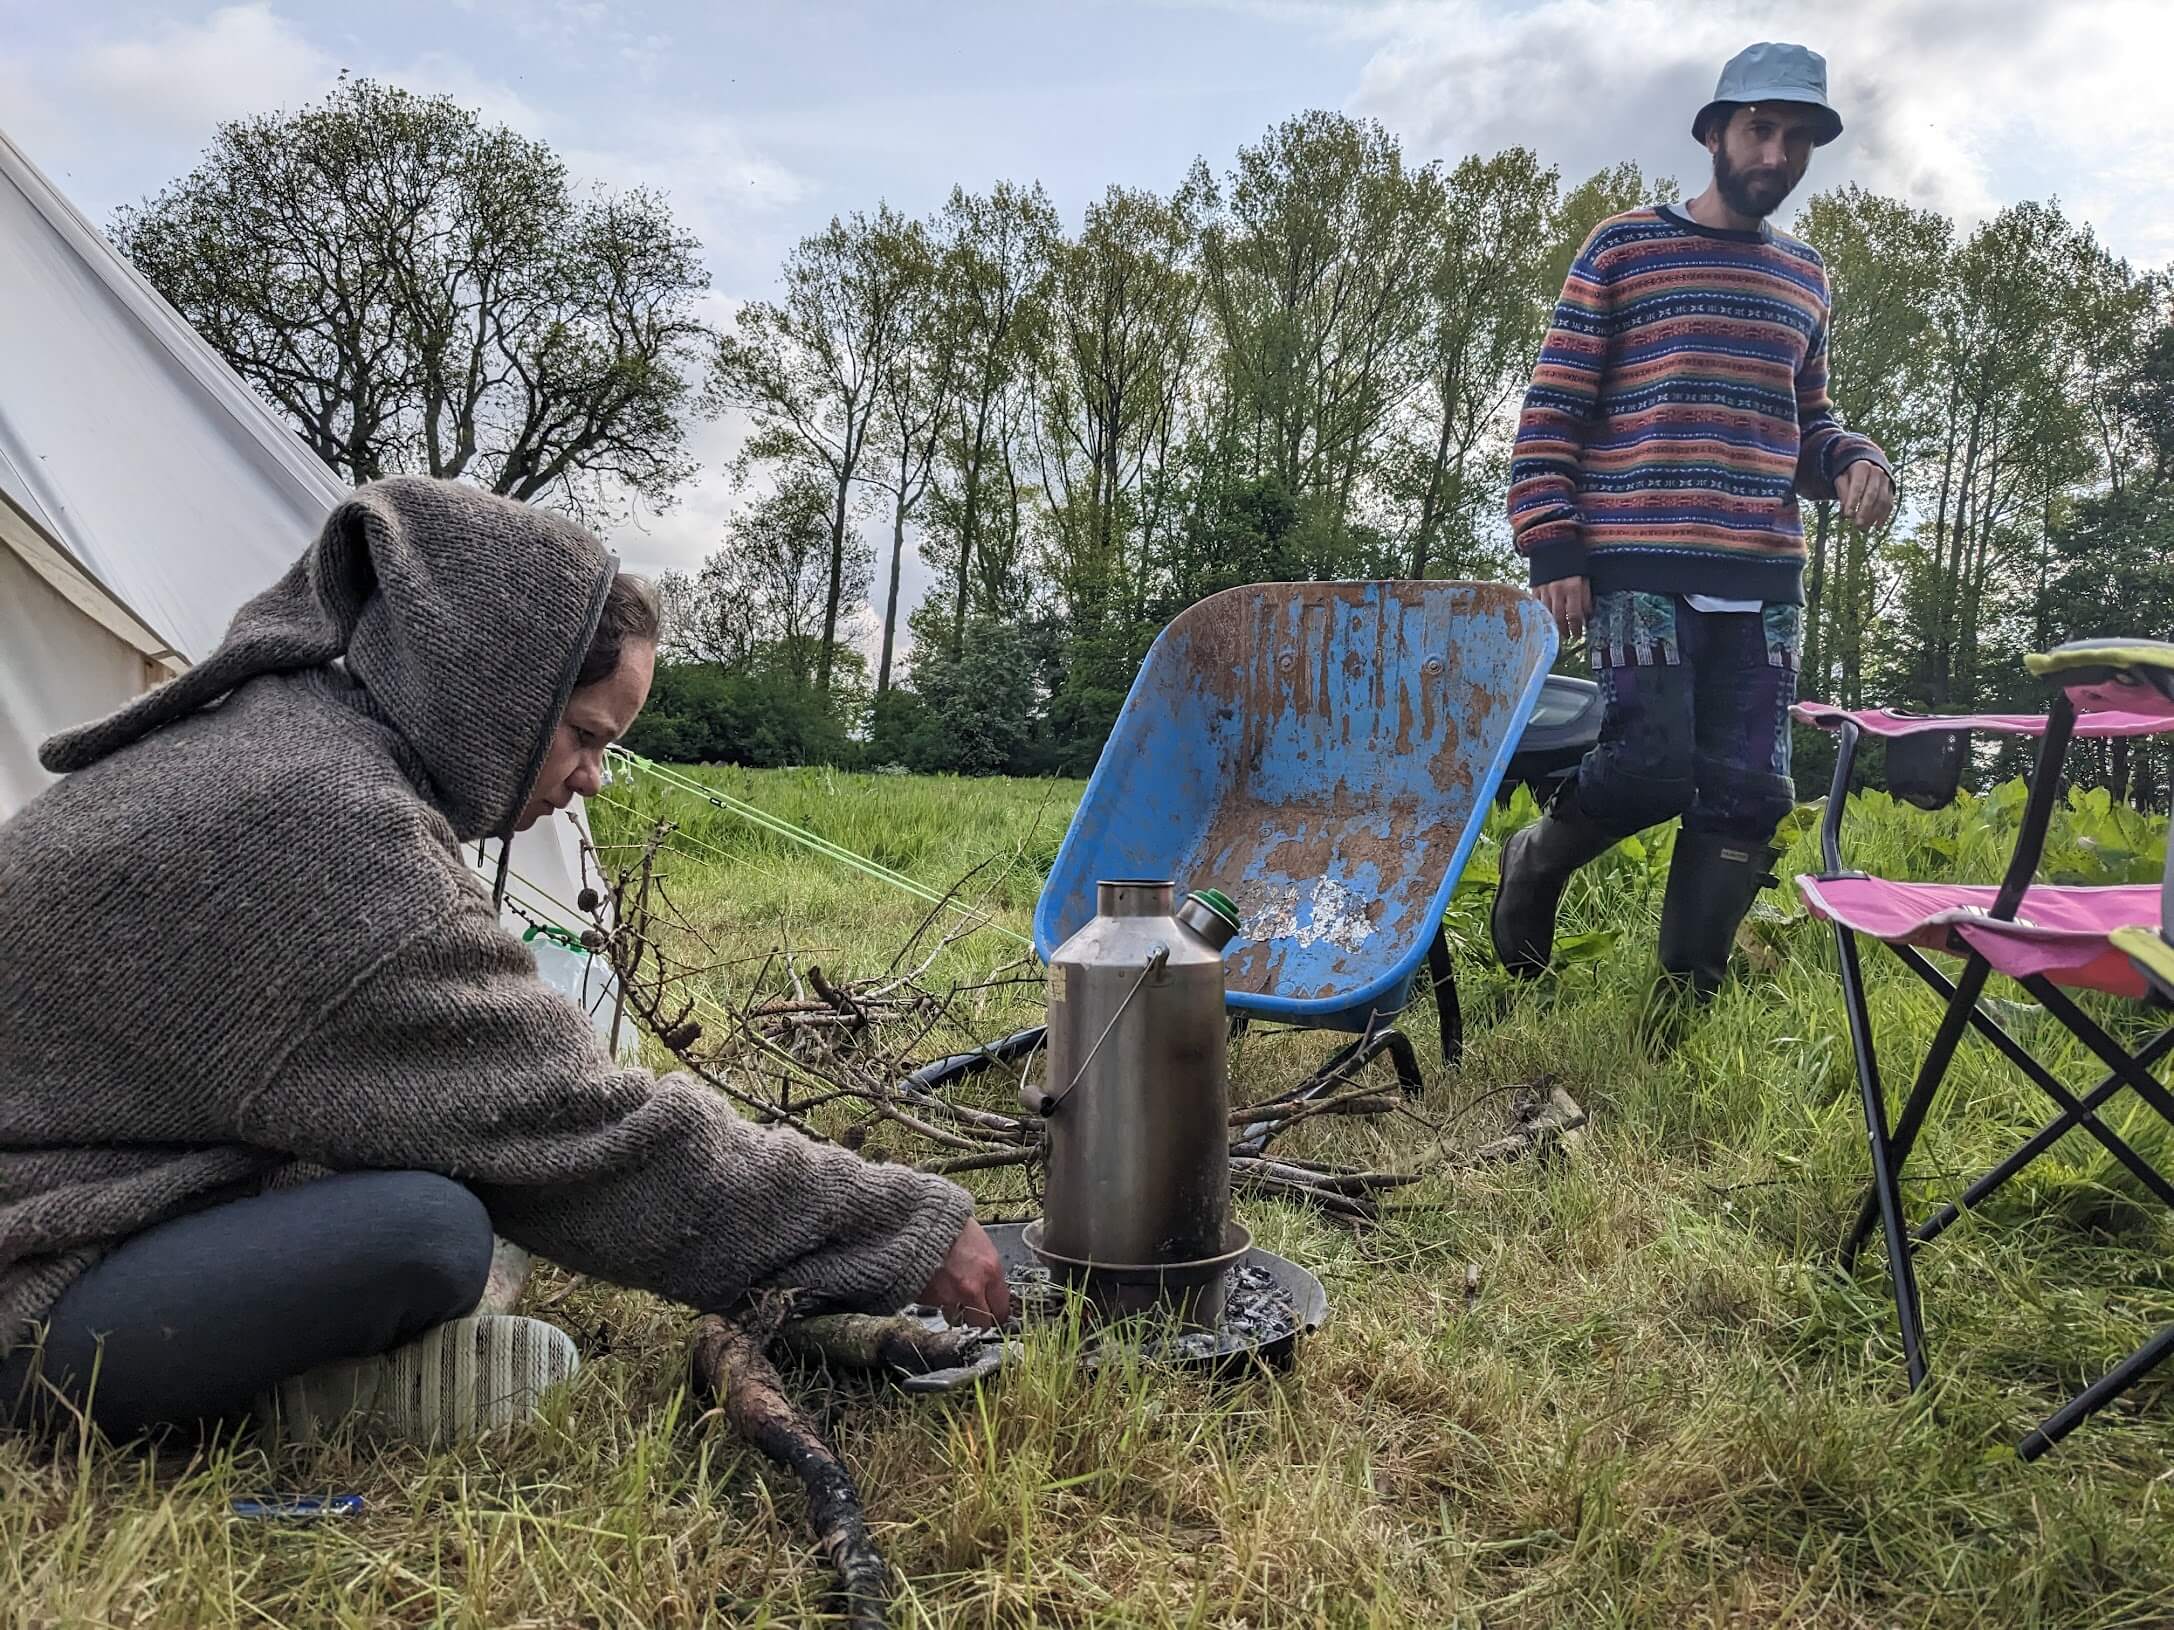 Two people camping in the UK